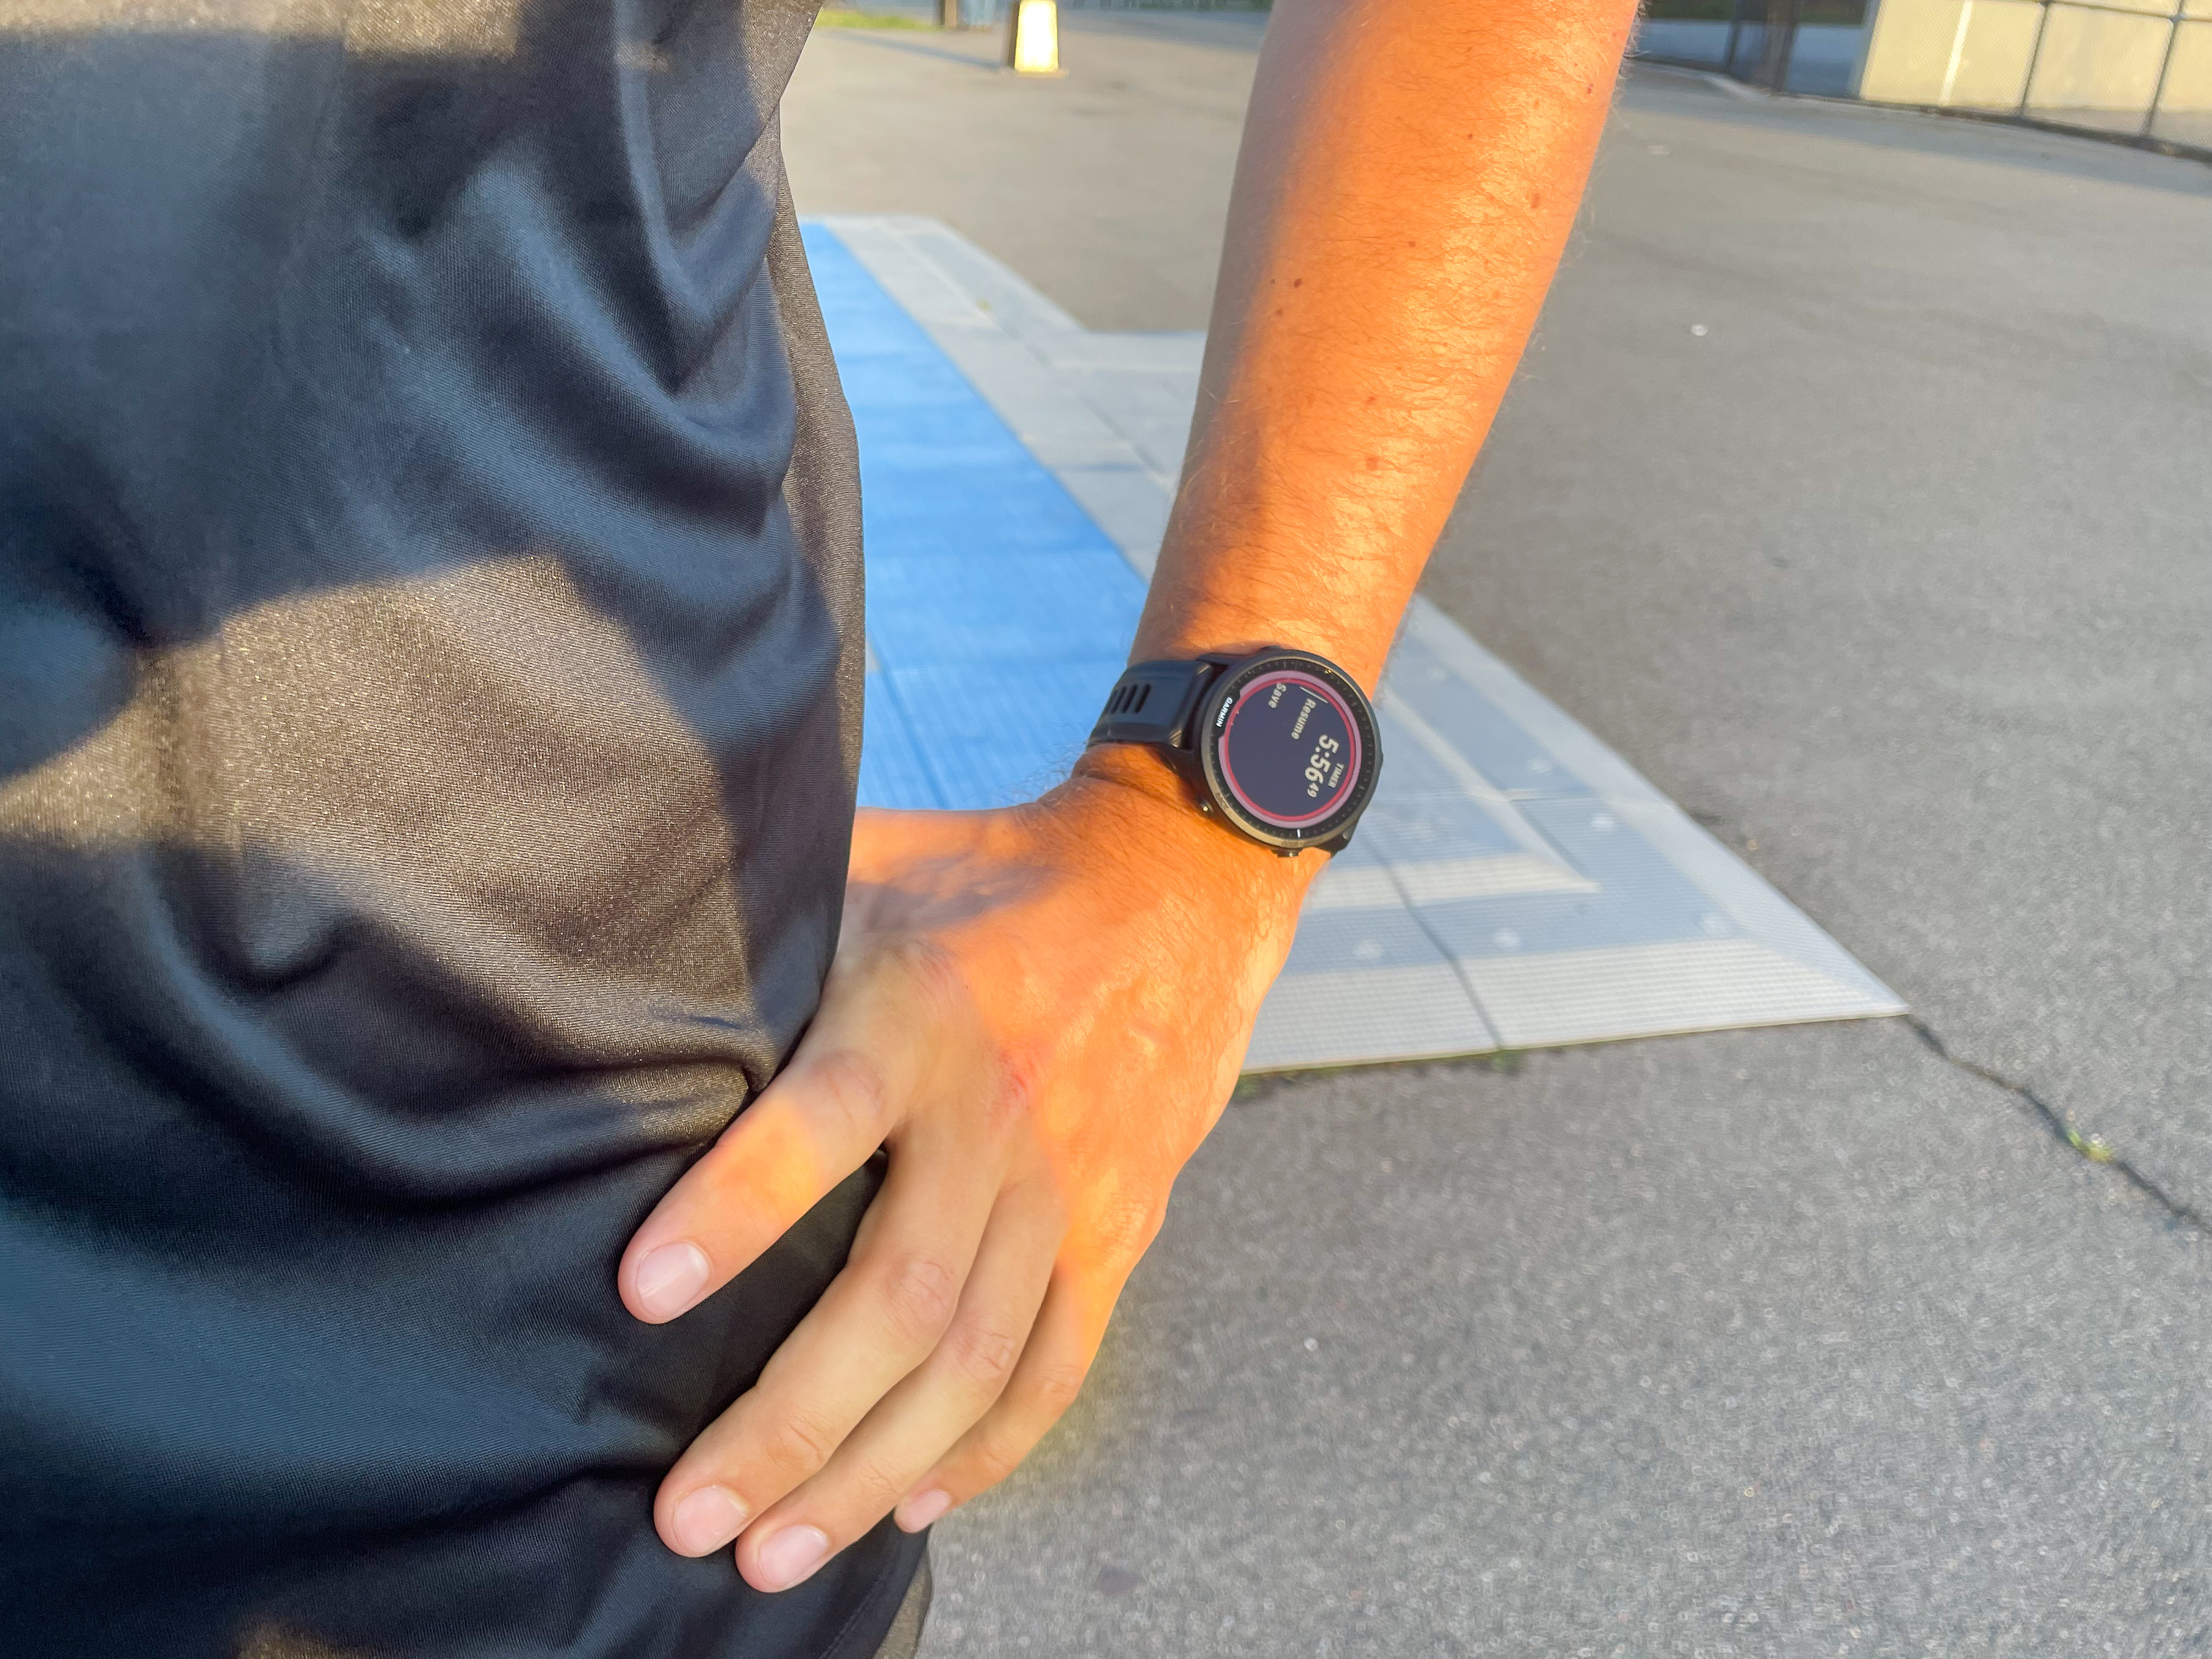 Garmin Forerunner 955 review: After 200 miles of testing